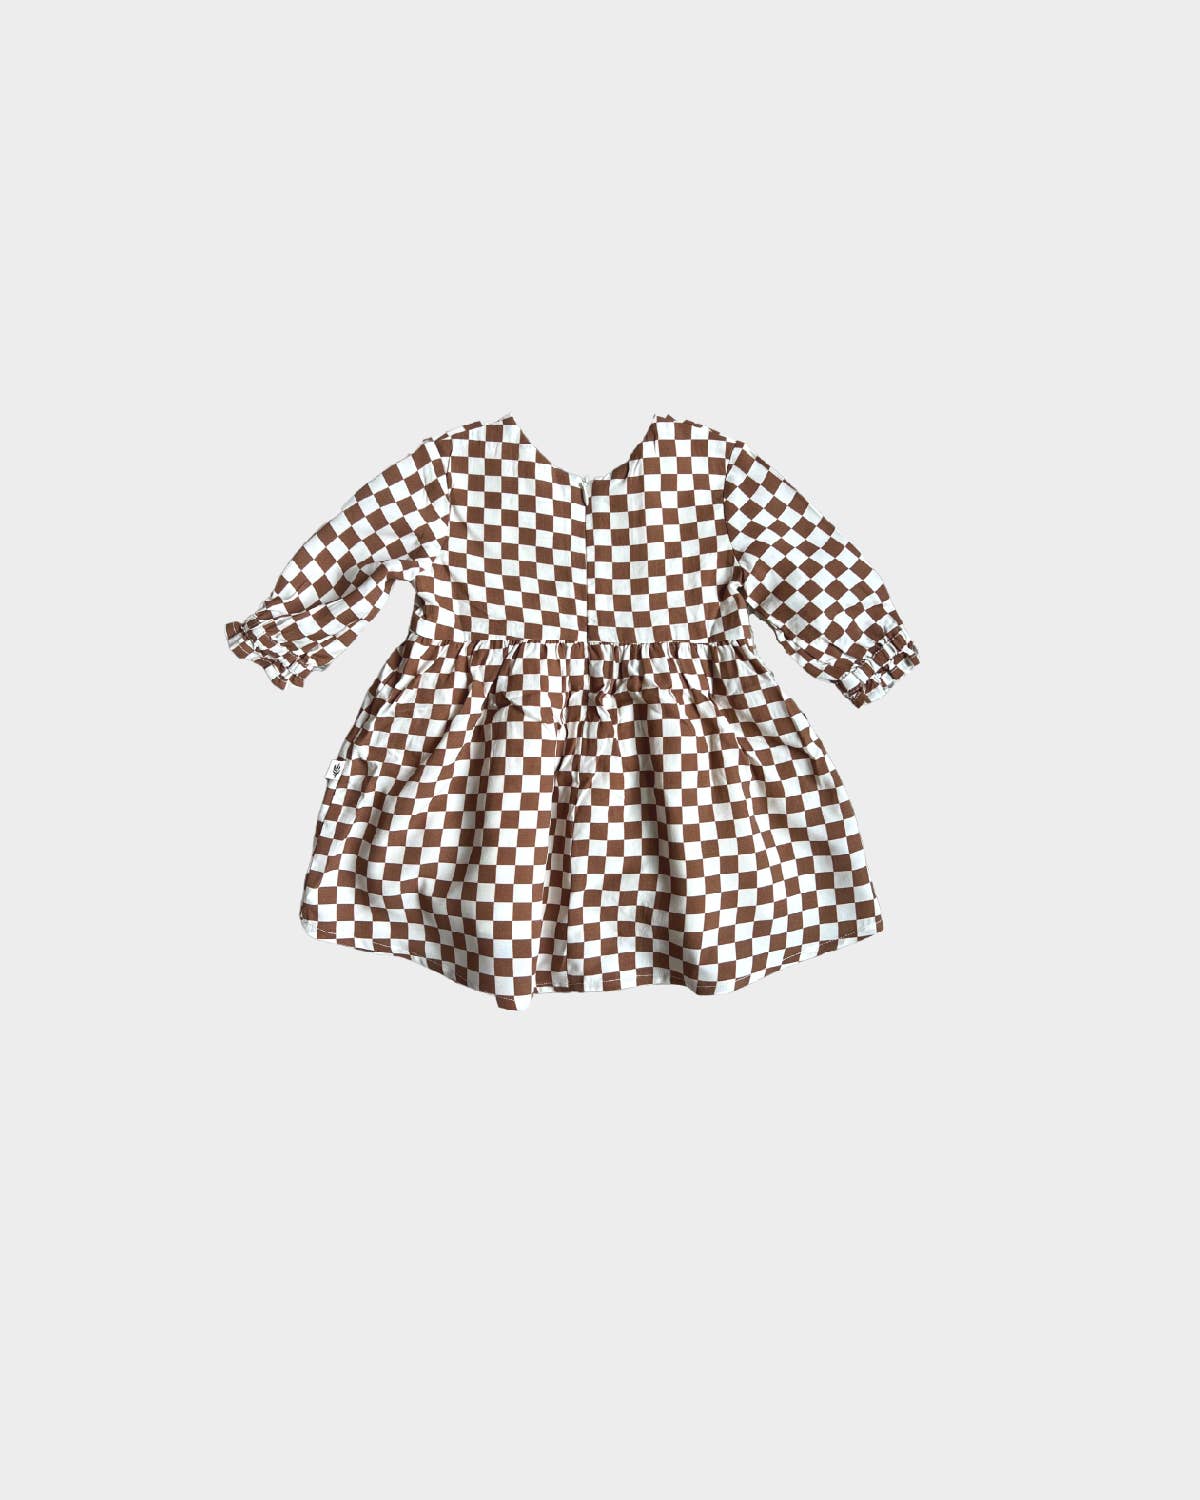 babysprouts clothing company - F23 D2: Girl's Woven Dress in Checkered